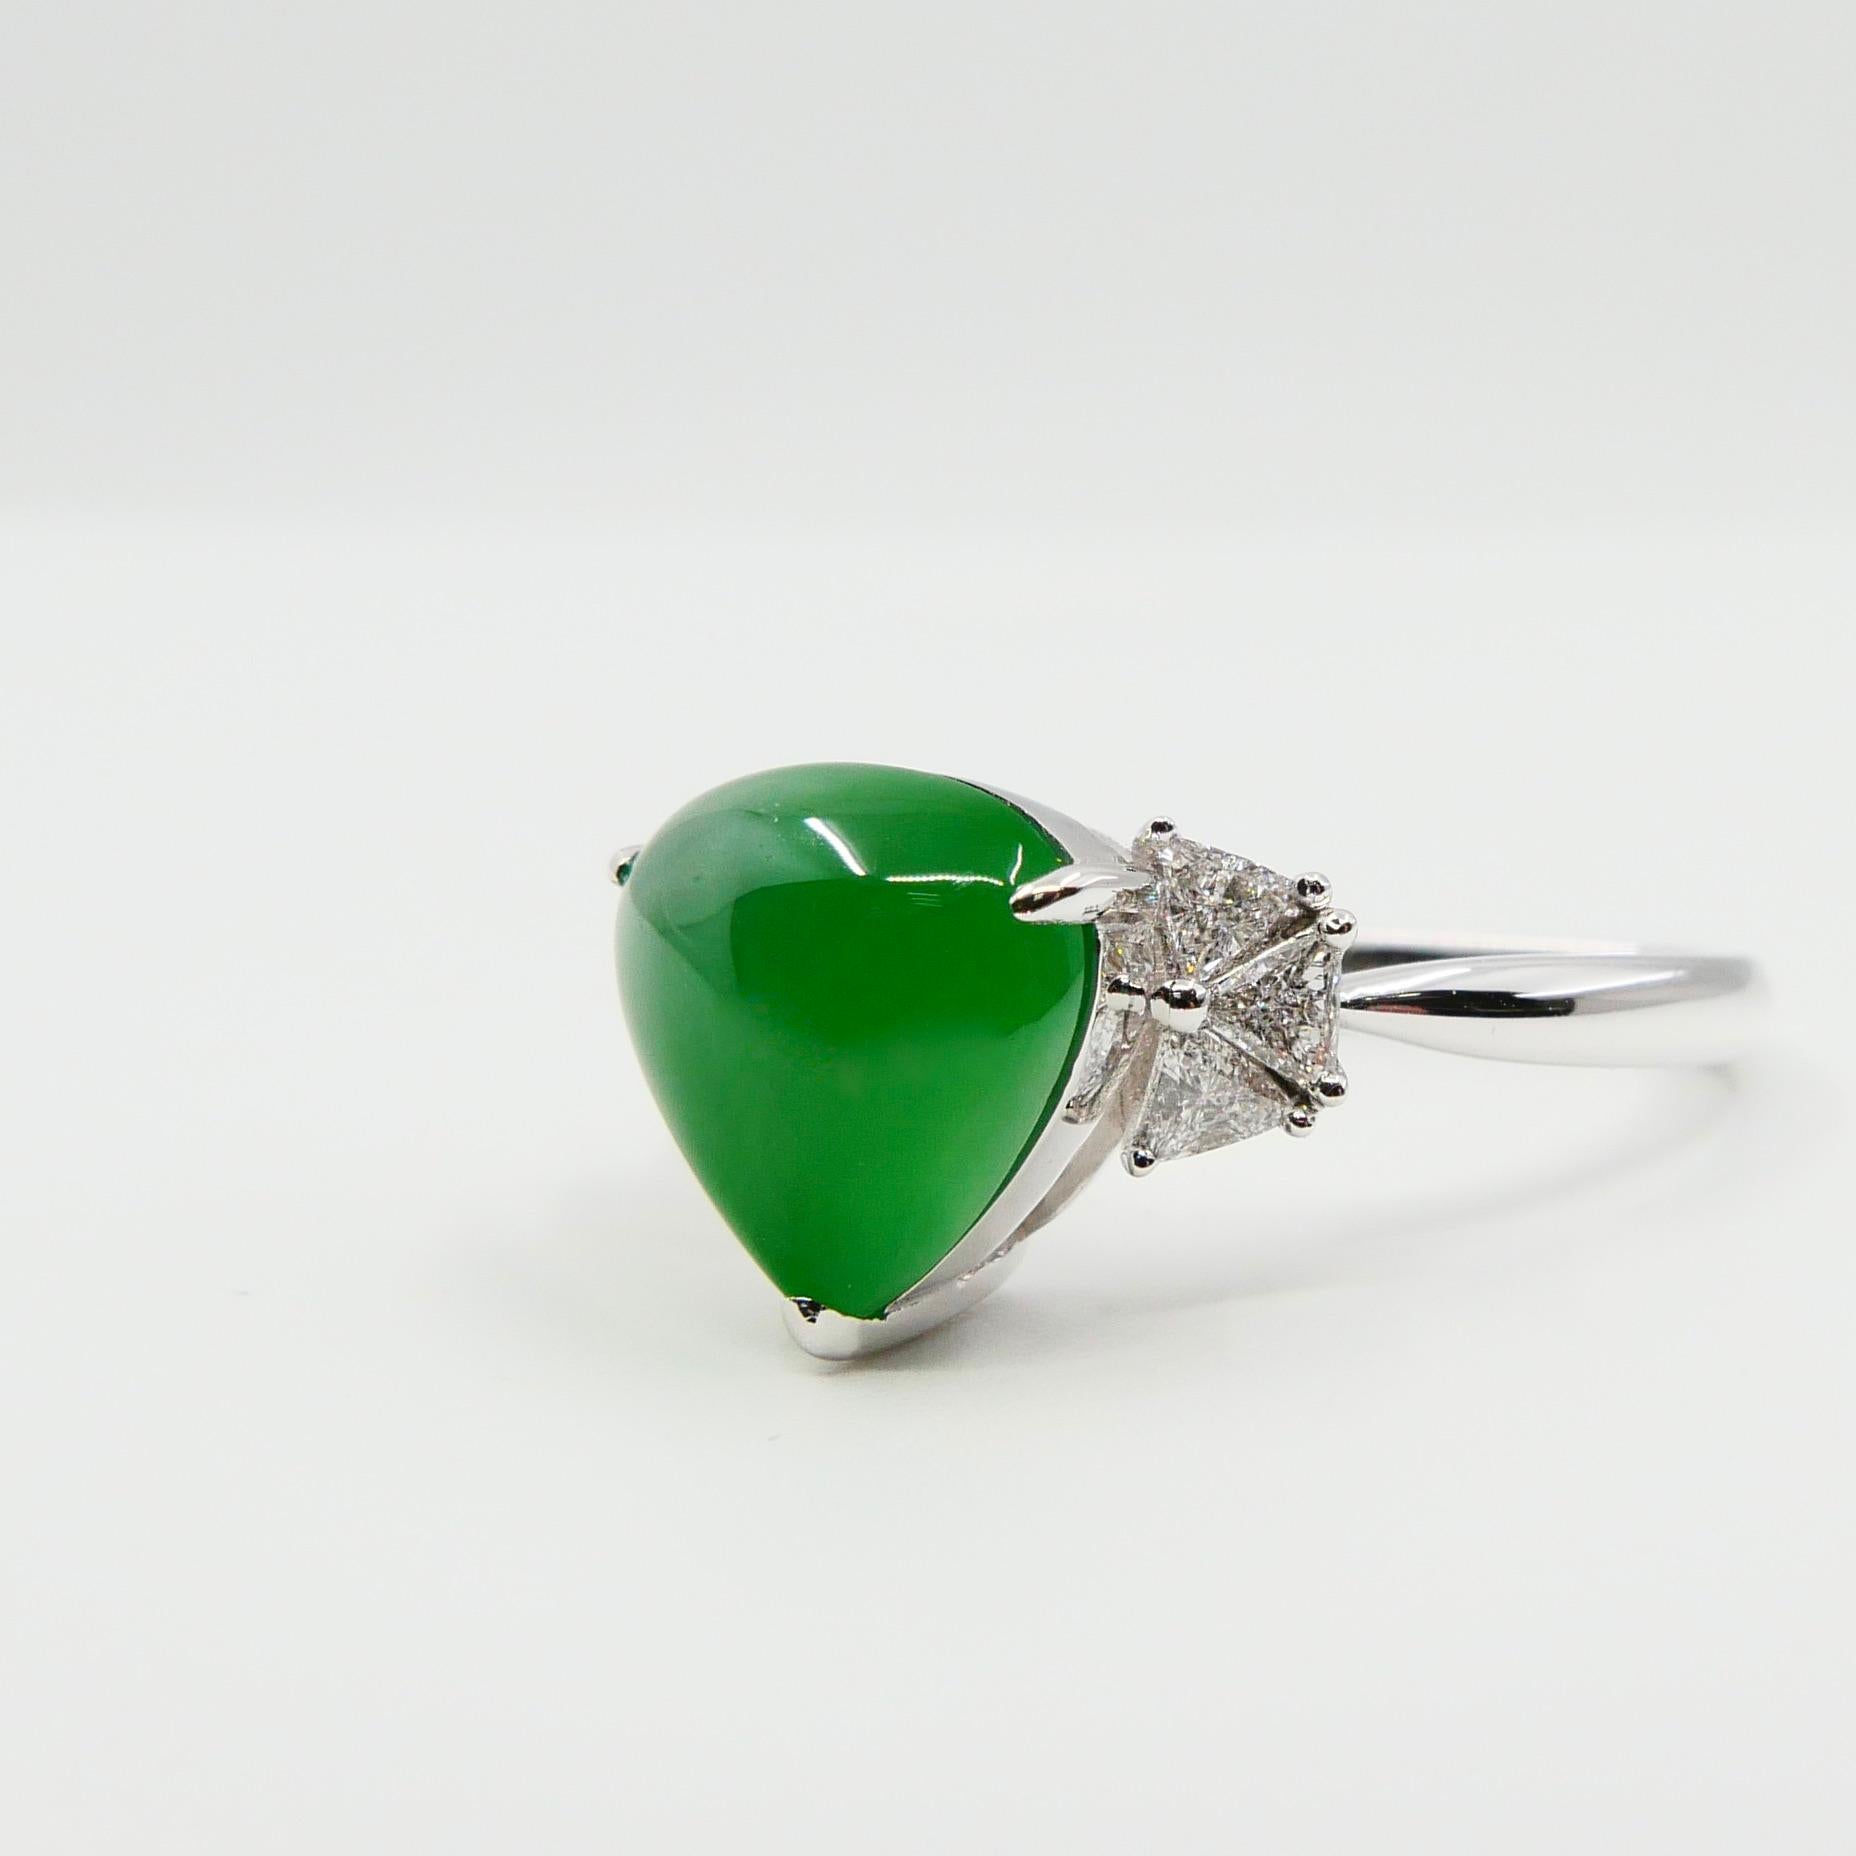 Contemporary Certified Natural Type A Jadeite Jade & Diamond Cocktail Ring, Apple Green Color